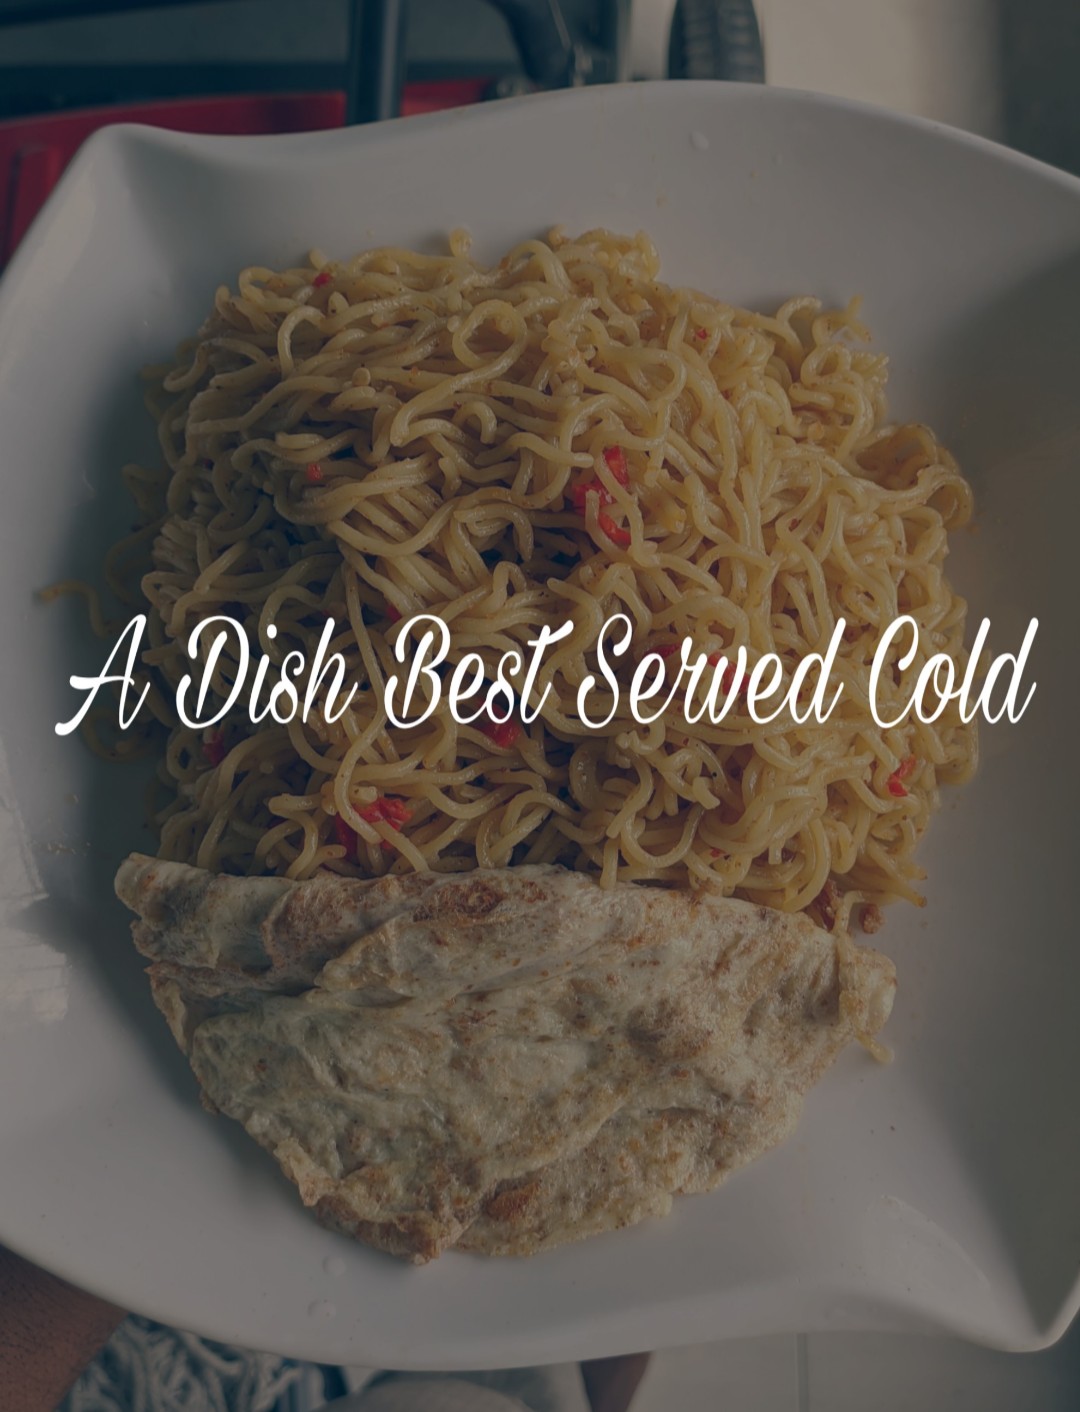 Dish Best Served Cold 457-460